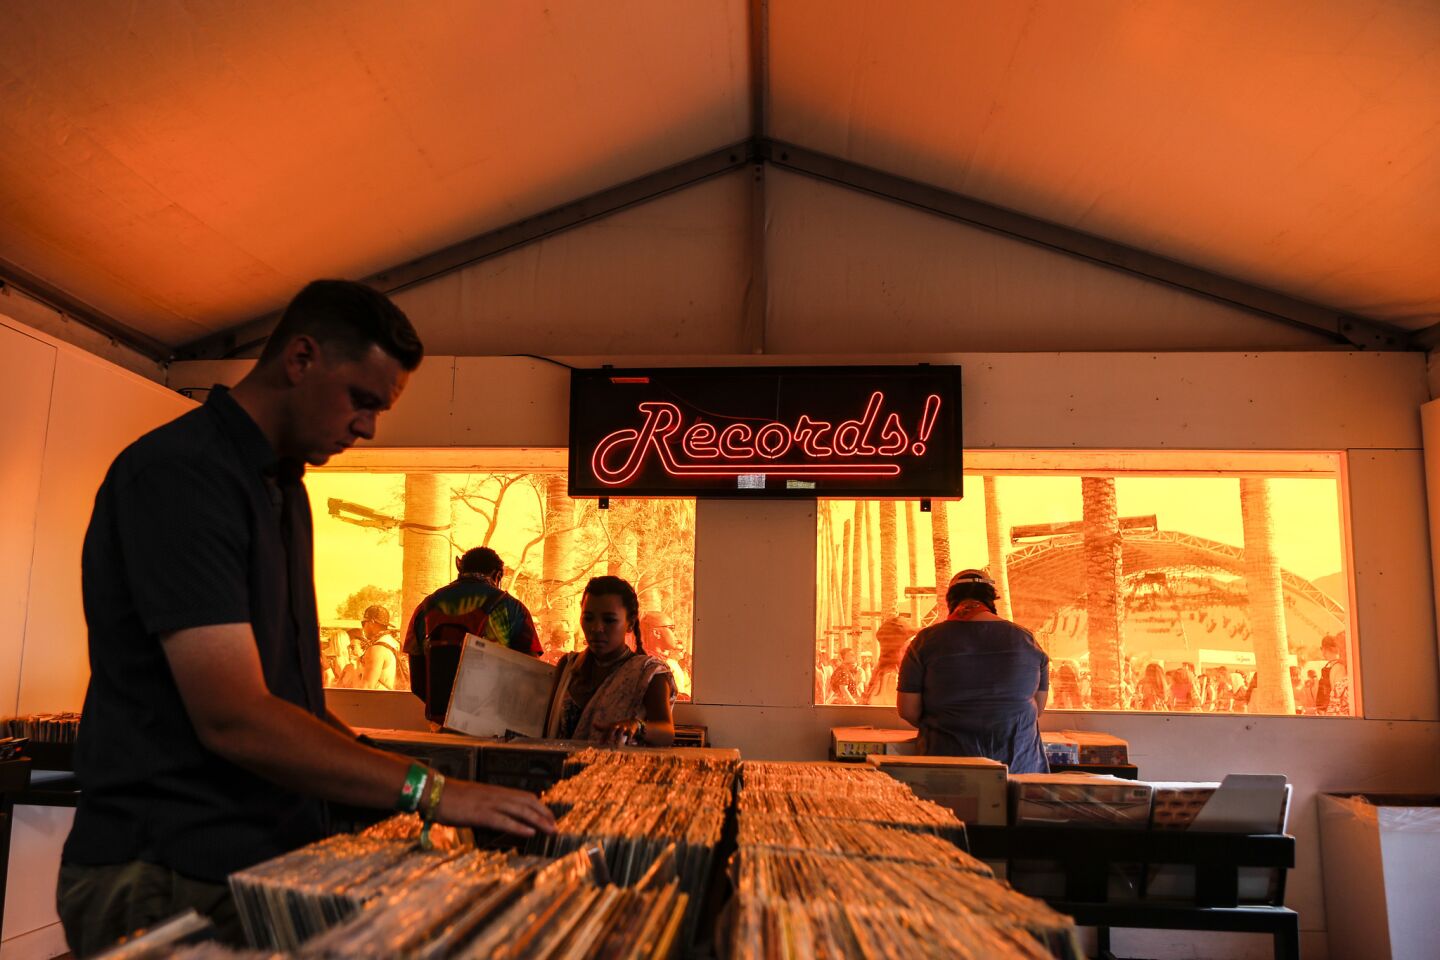 Fans find themselves in vinyl heaven at Coachella's record store next to the Yuma tent.